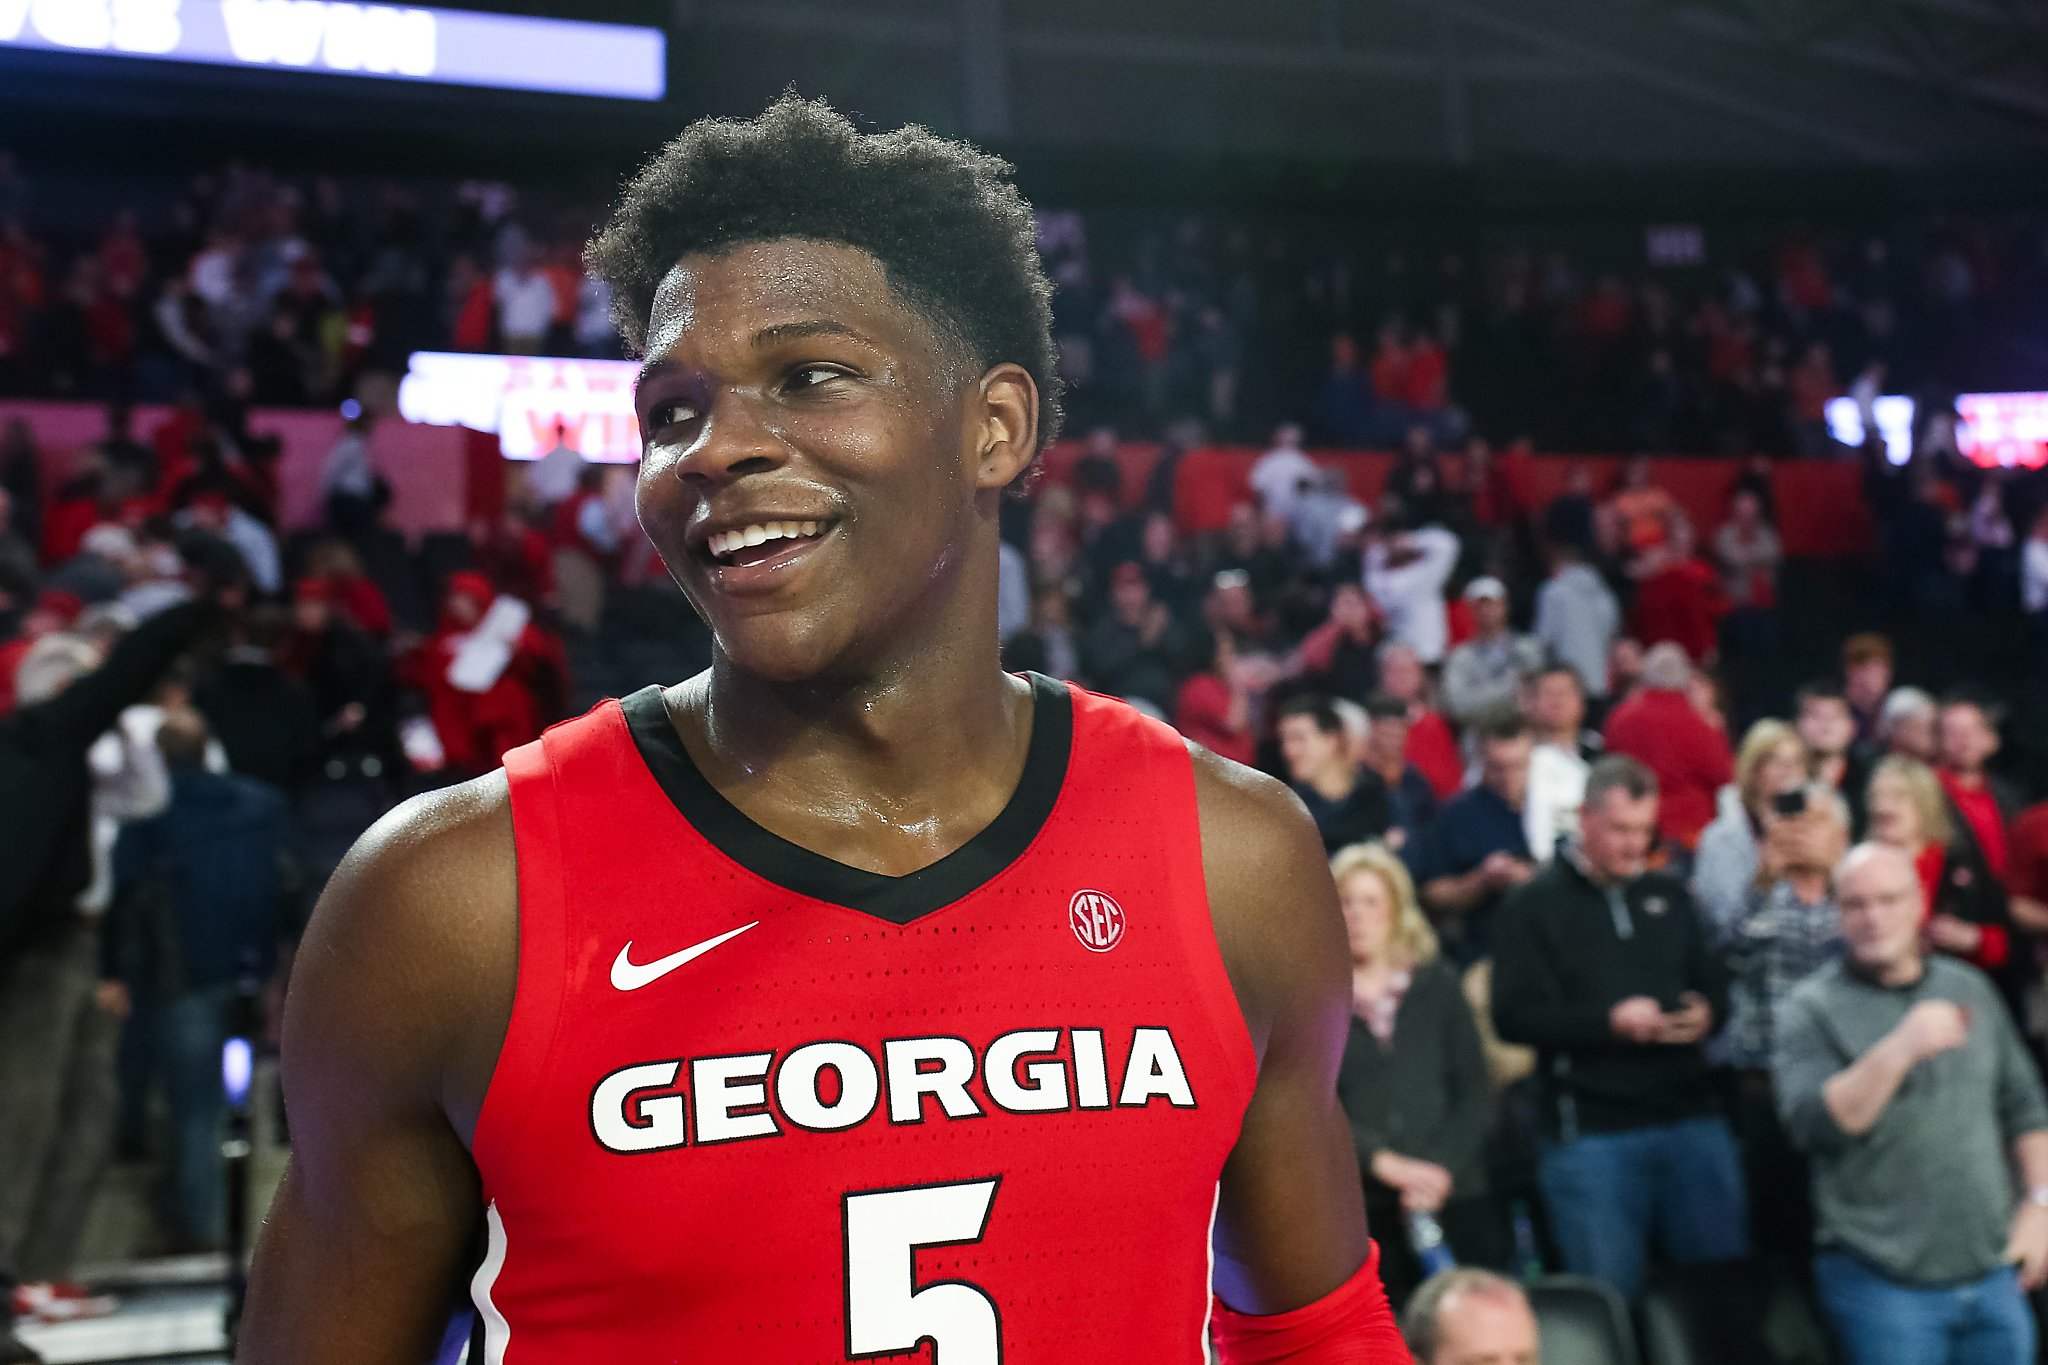 Former UGA basketball star Anthony Edwards on working out in front